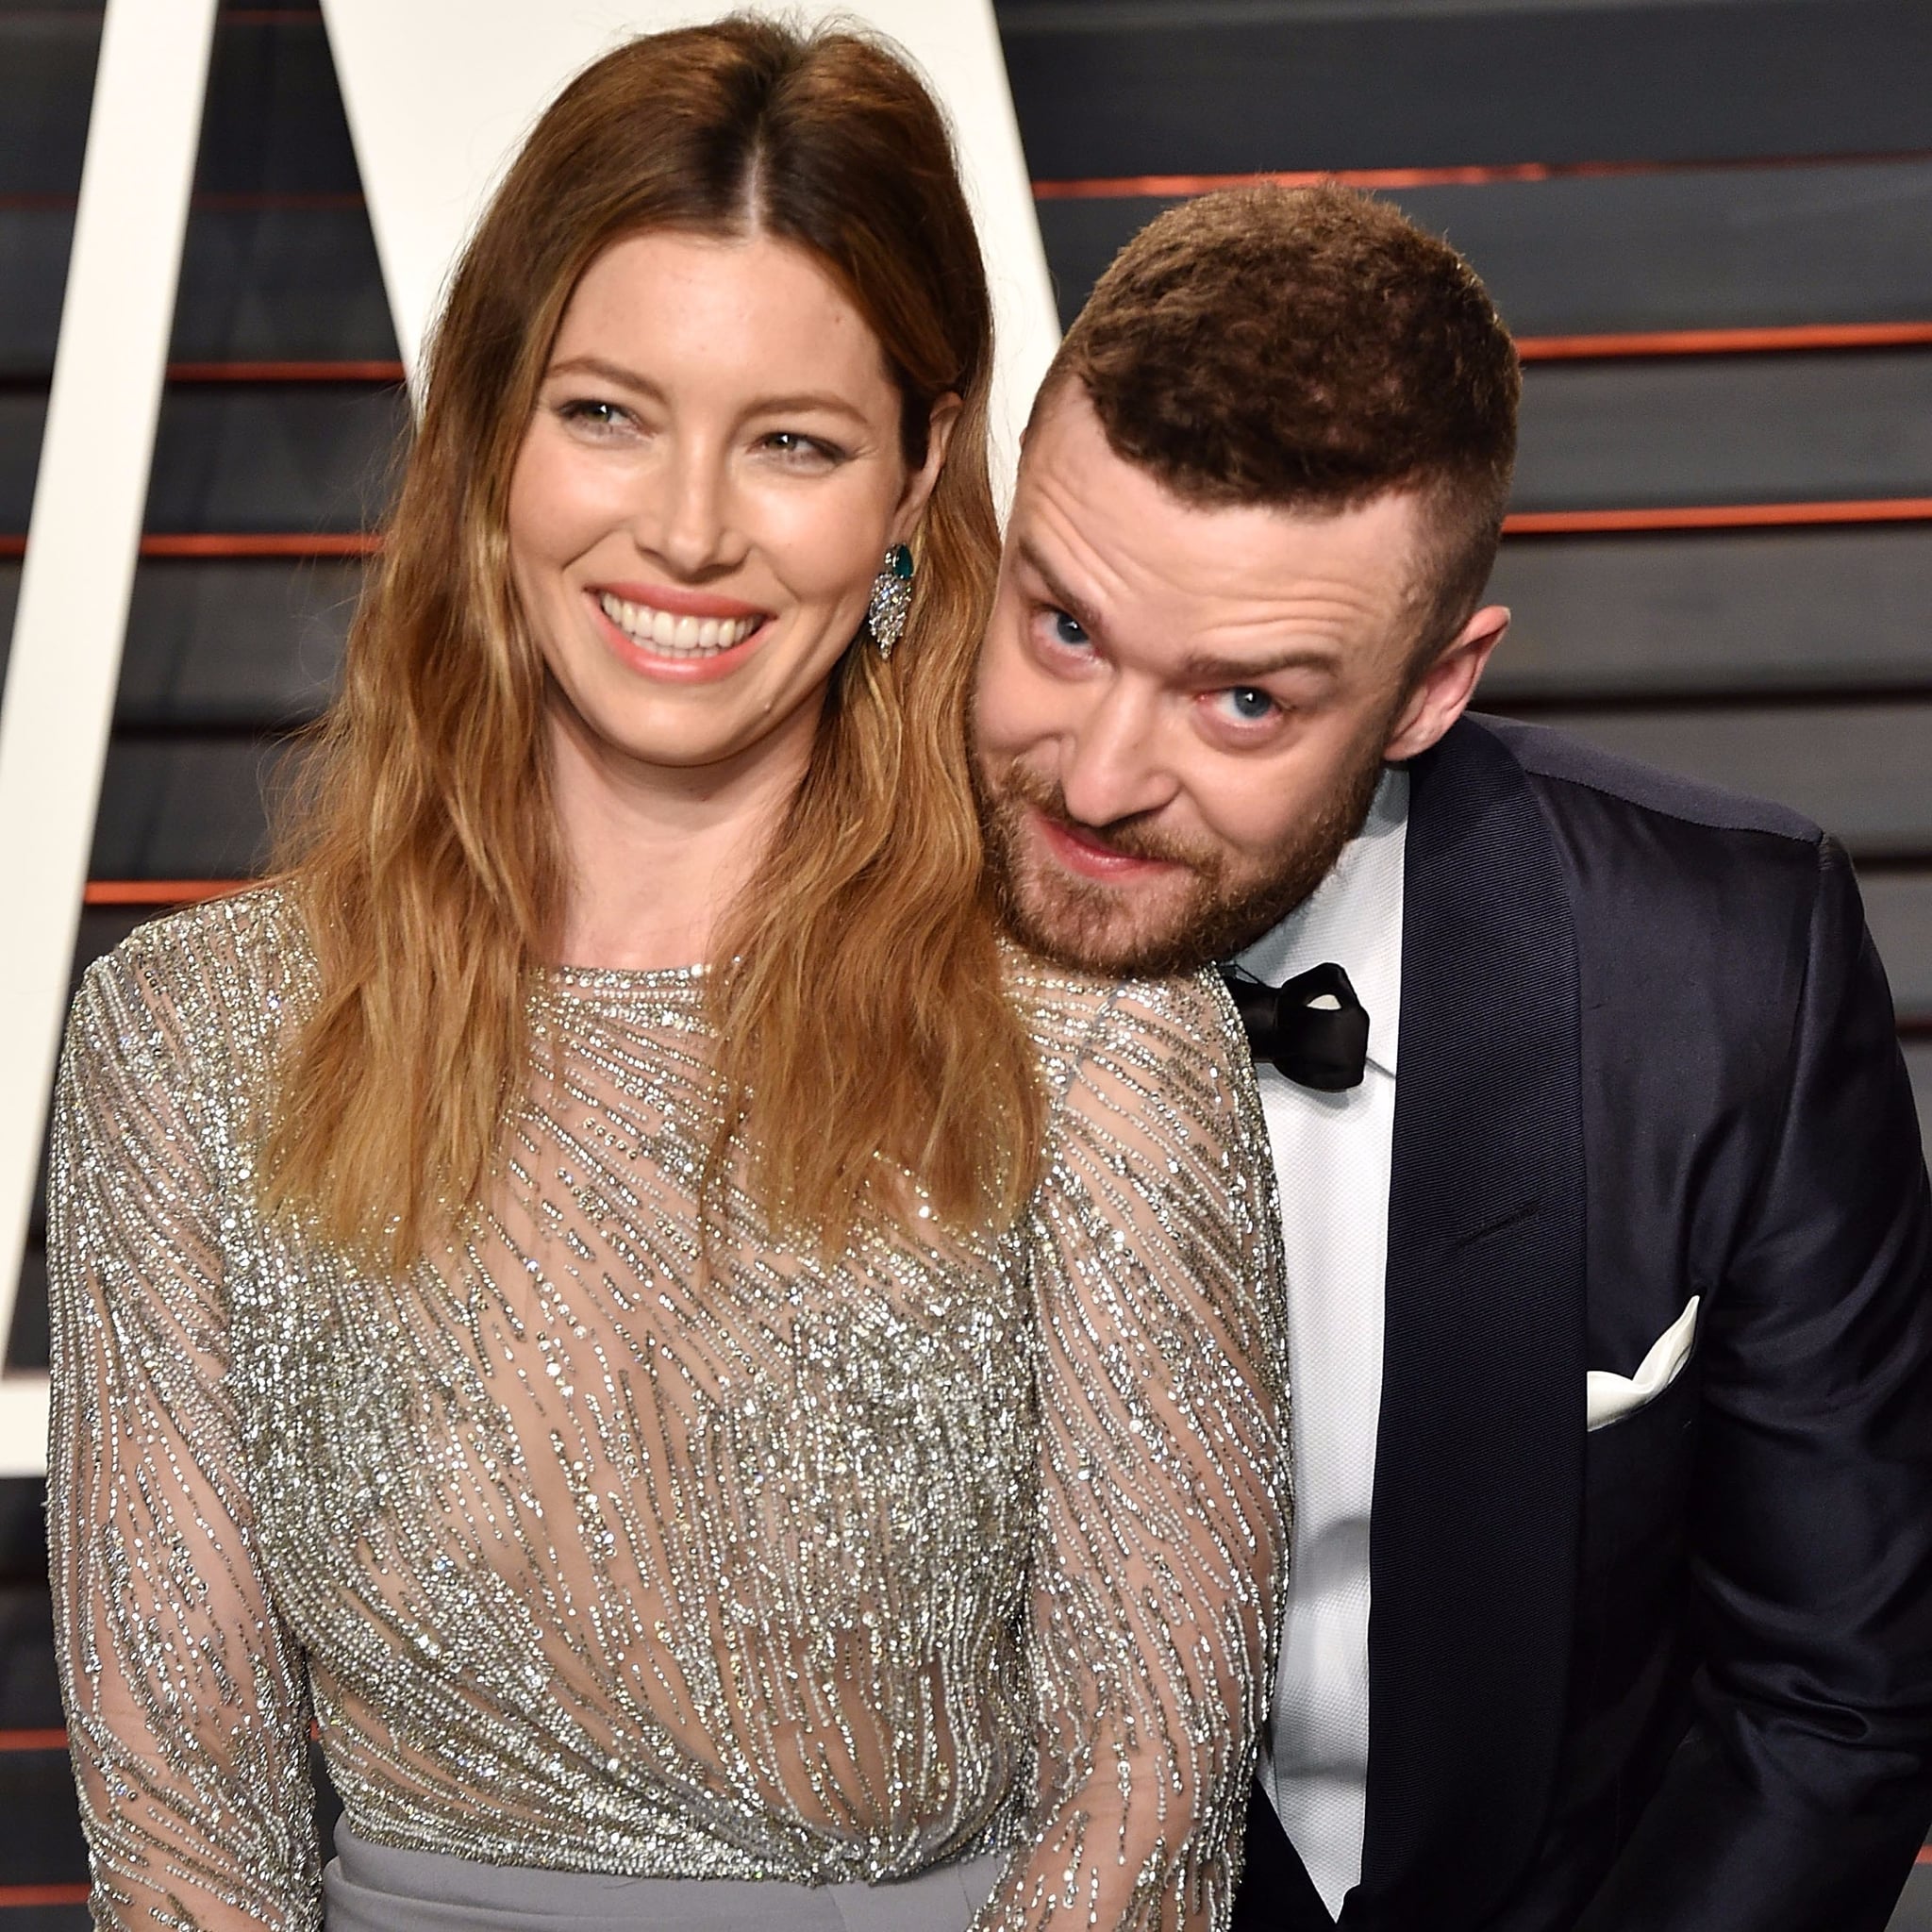 Justin Timberlake And Jessica Biel Wedding Popsugar Middle East Celebrity And Entertainment